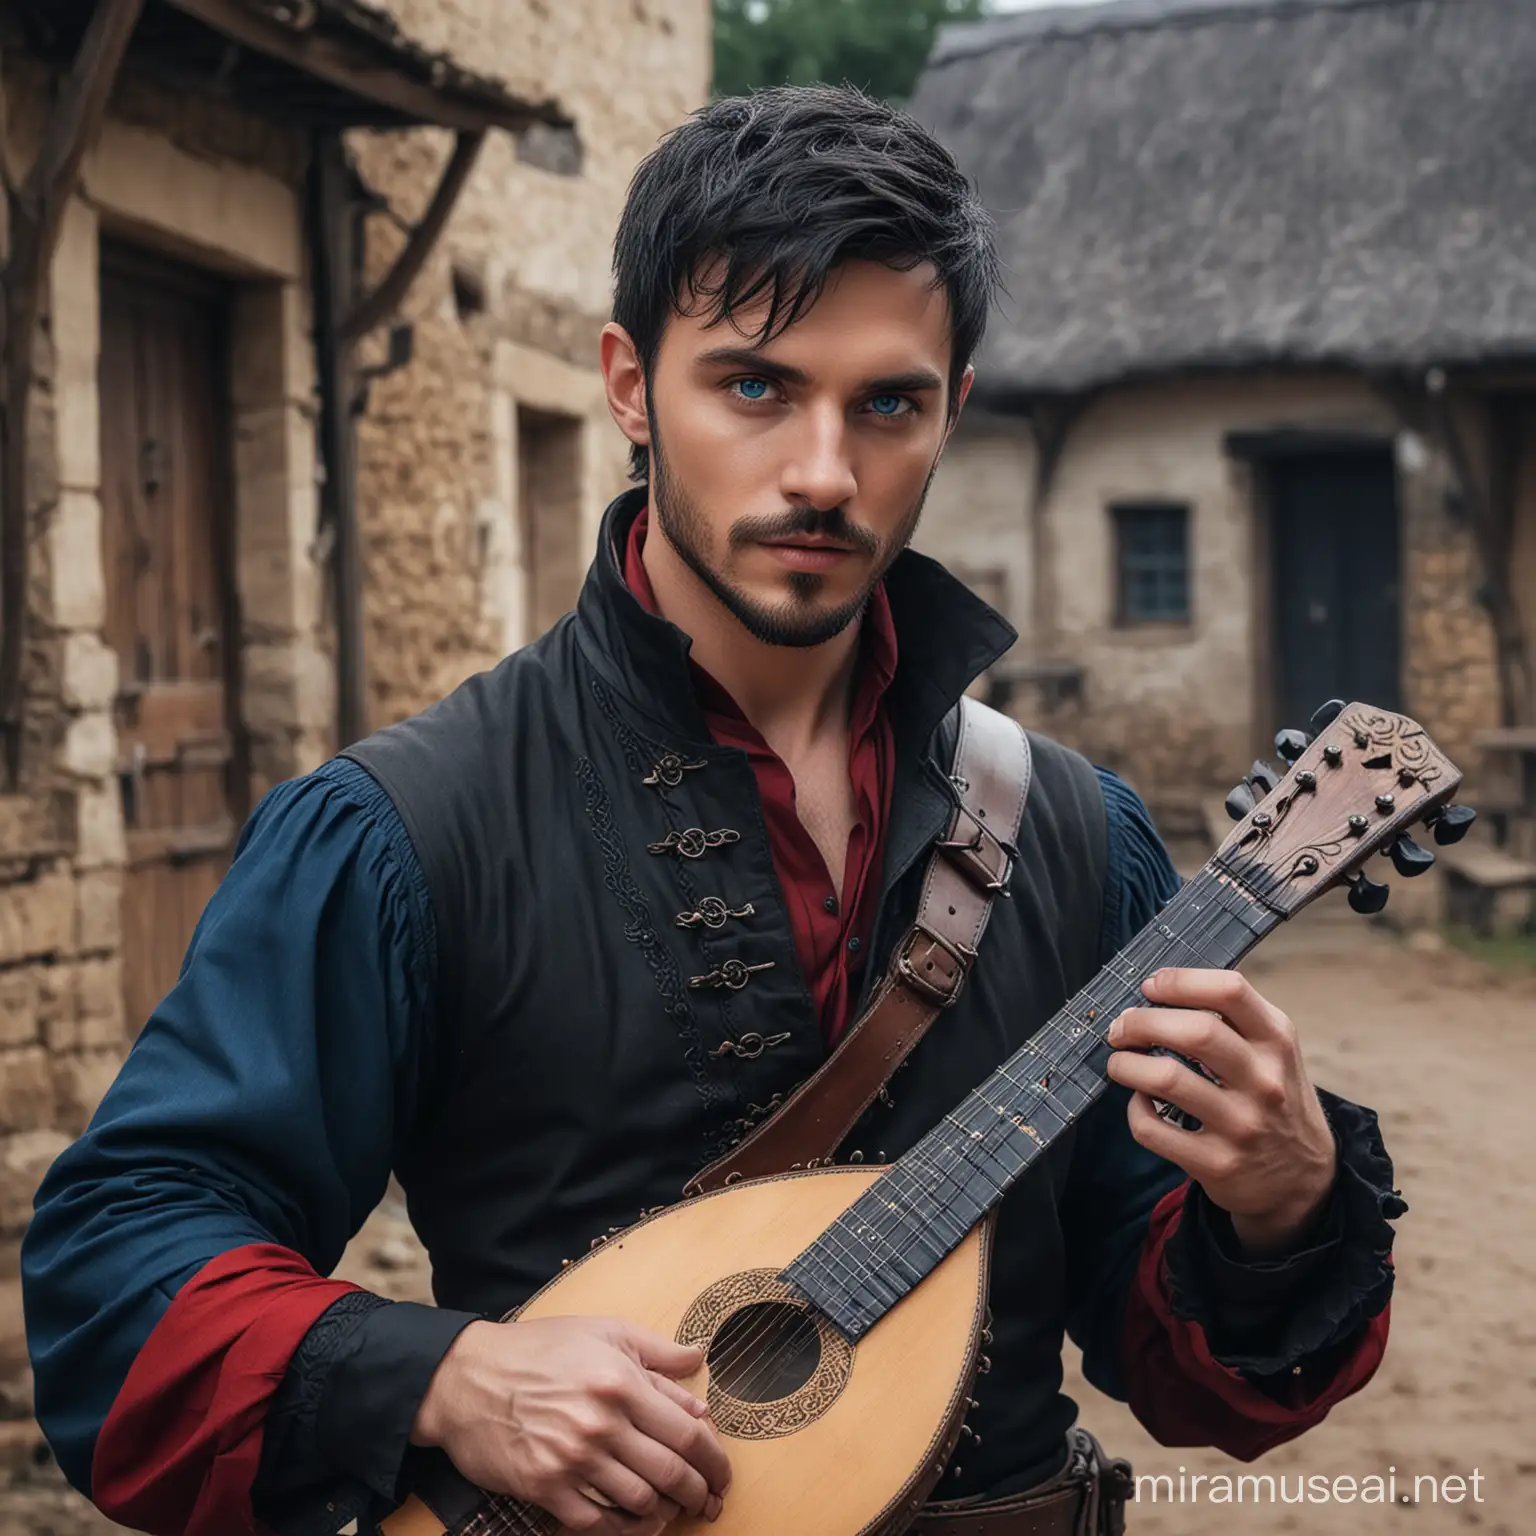 Fantasy bard, human, male, short black hair, blue eyes, stubble beard, dark outfit with red details, lute in his hands, in a village